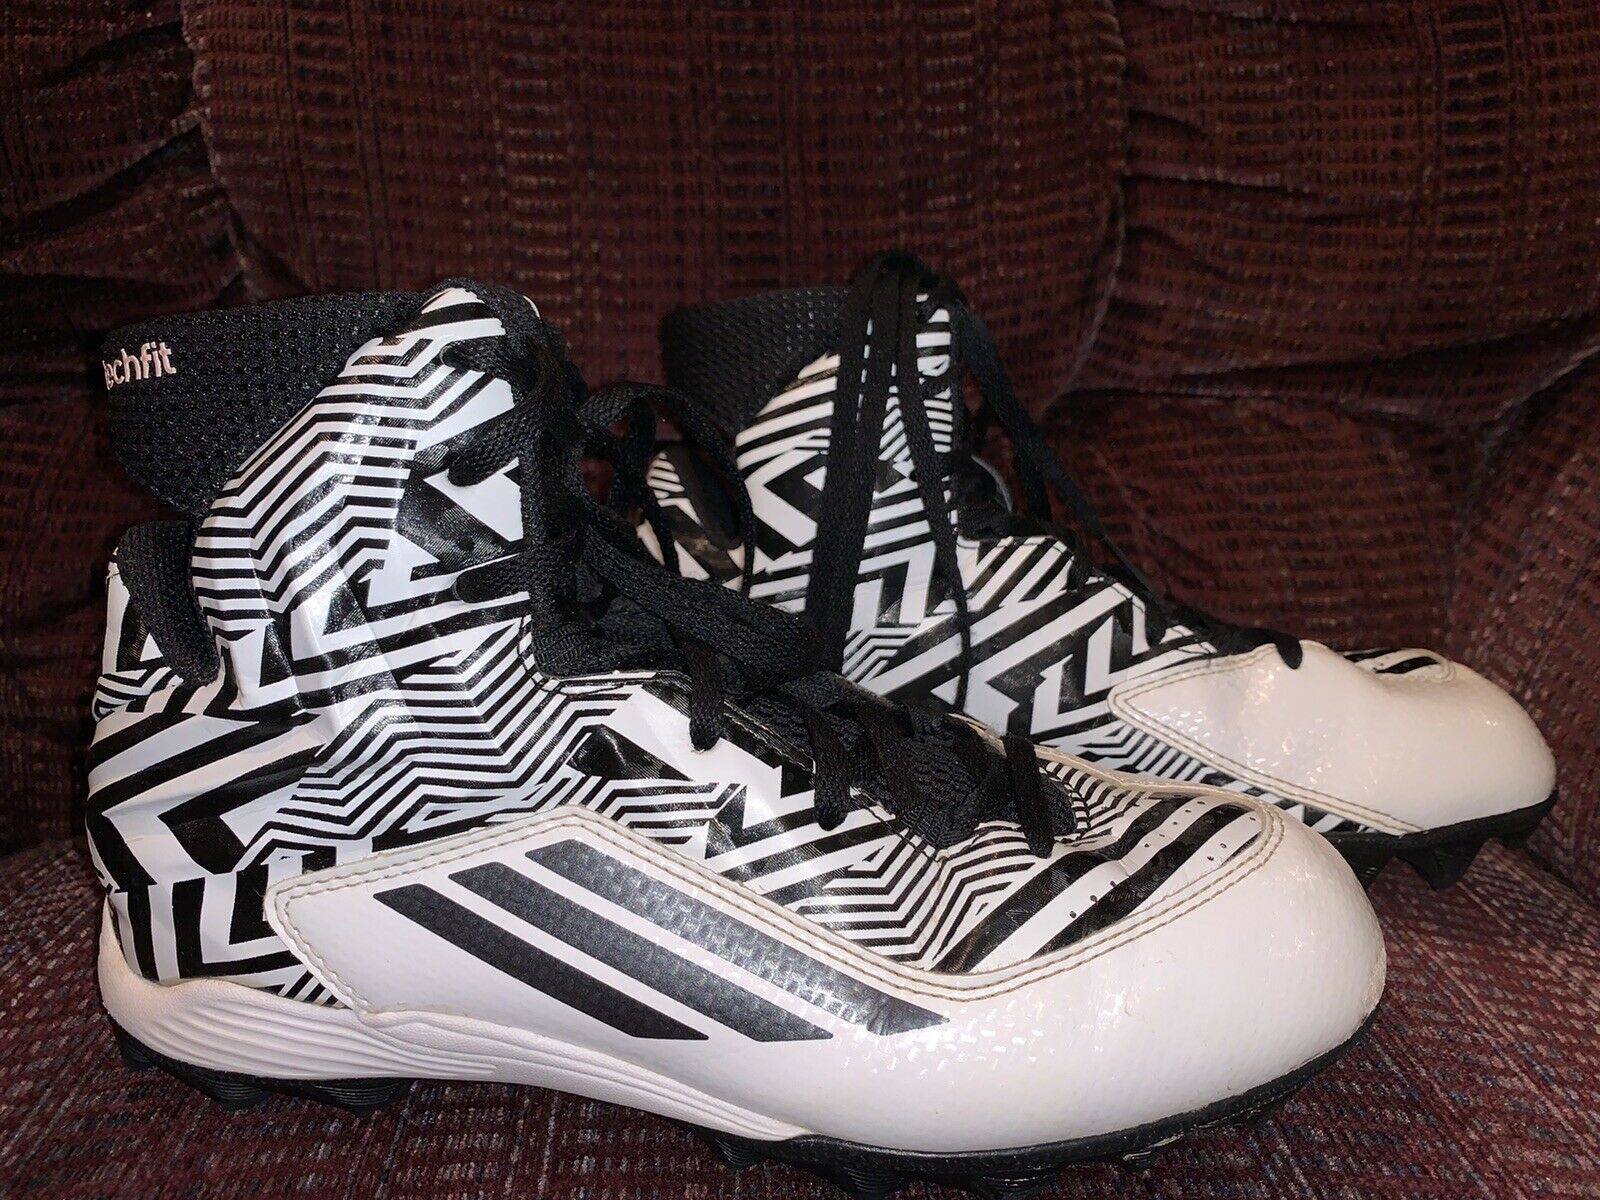 Youth Size 4 Adidas Black & White Football Cleats